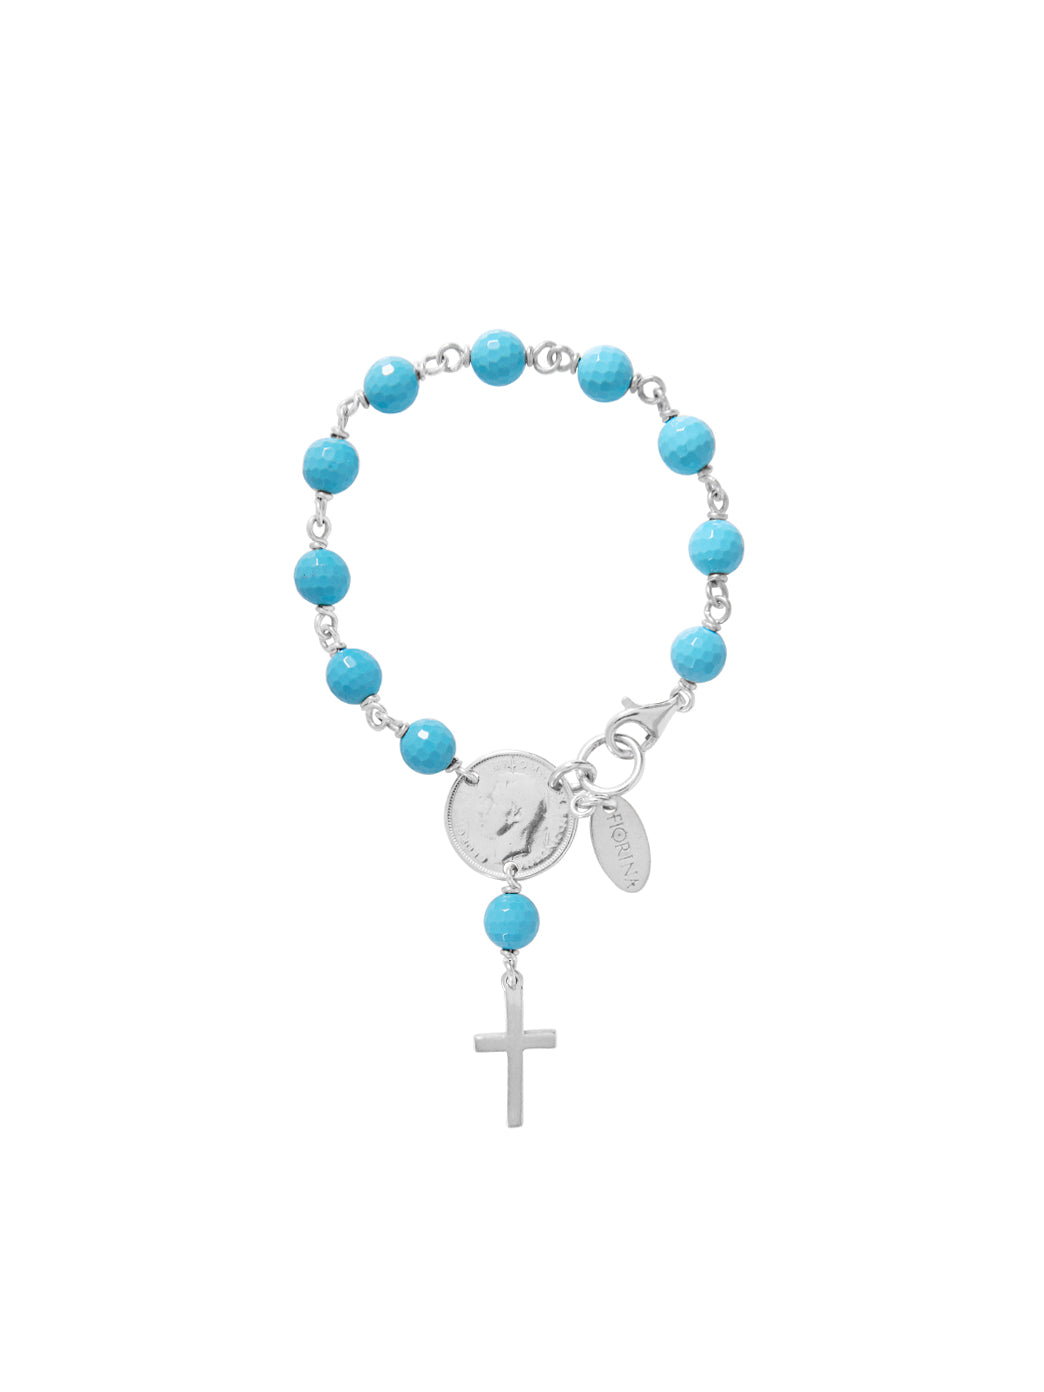 Pagodite Stone Rosary Bracelet W/stainless Steel Memory Wire. Italian Made  Cross, Titanium Cross Our Fathers and Sacred Heart of Jesus Charm - Etsy